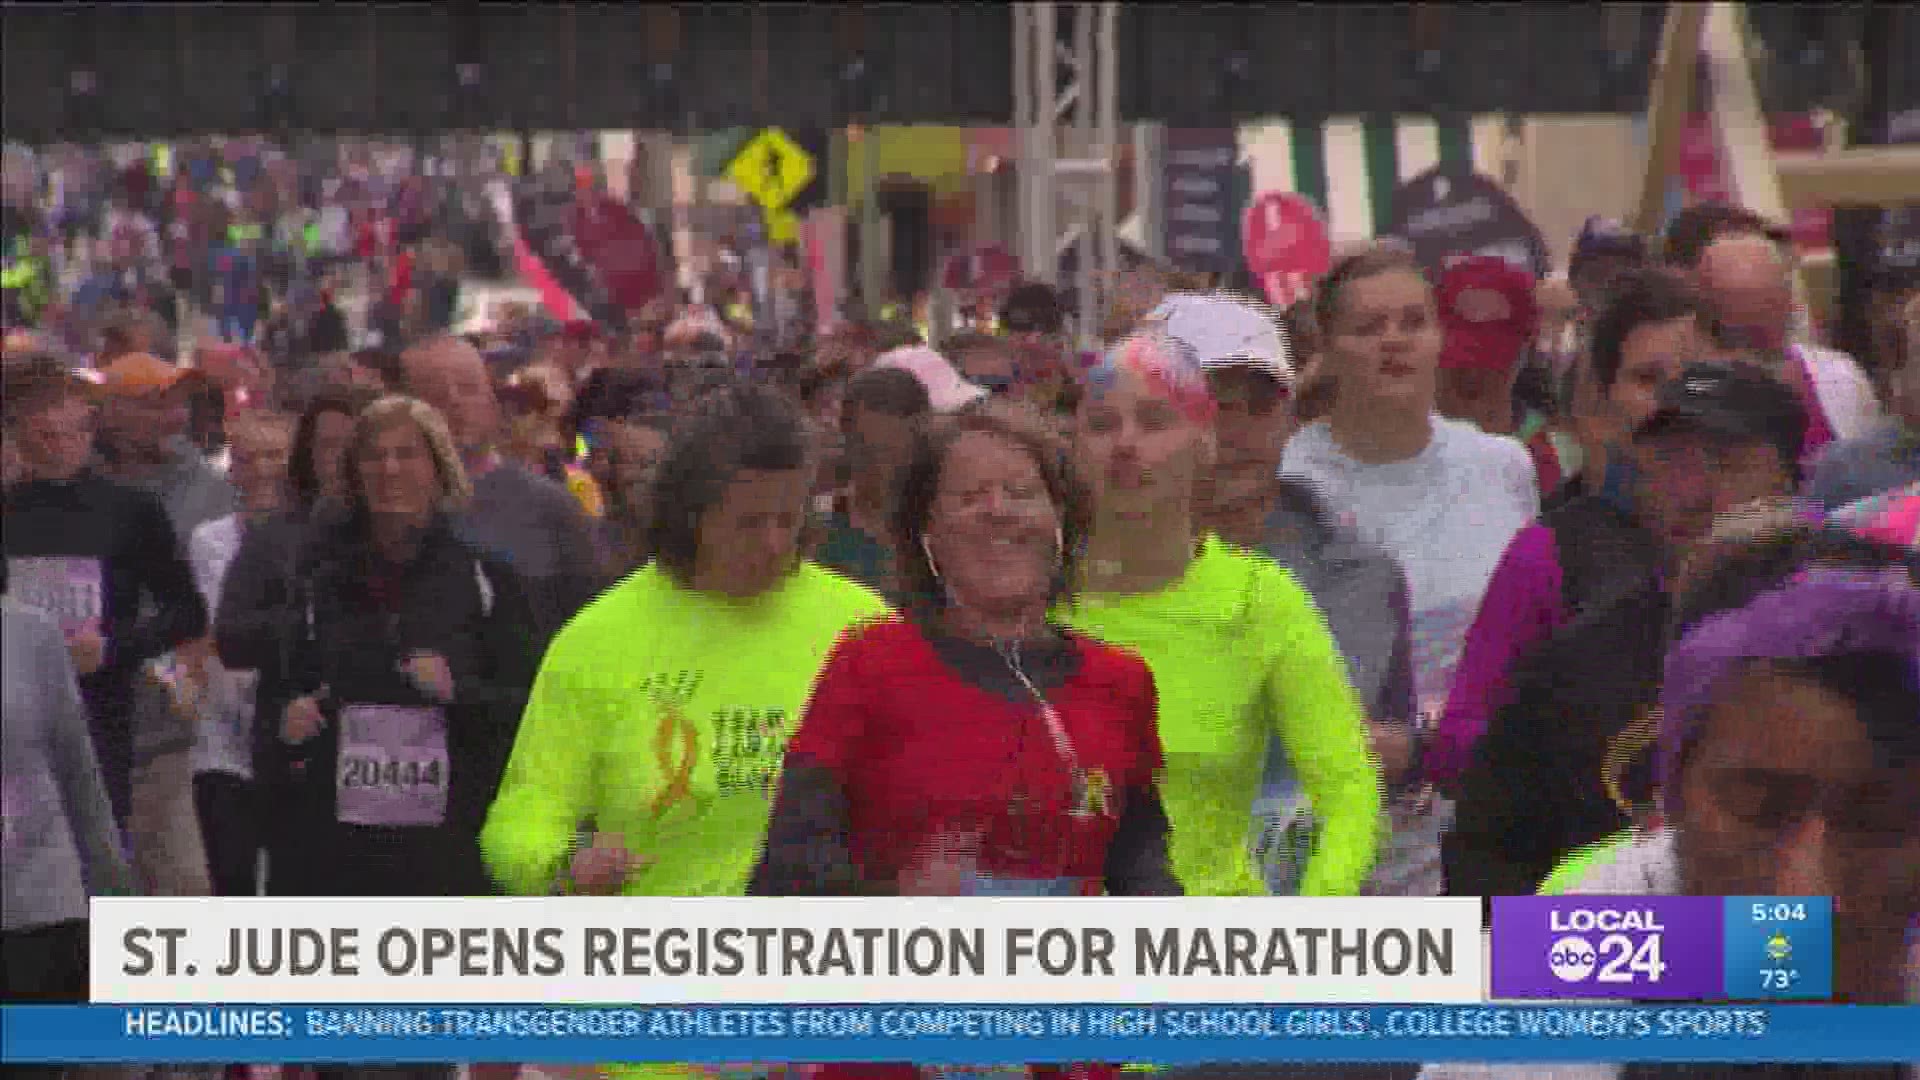 The St. Jude Memphis Marathon is making its in-person return after being virtual in 2020.